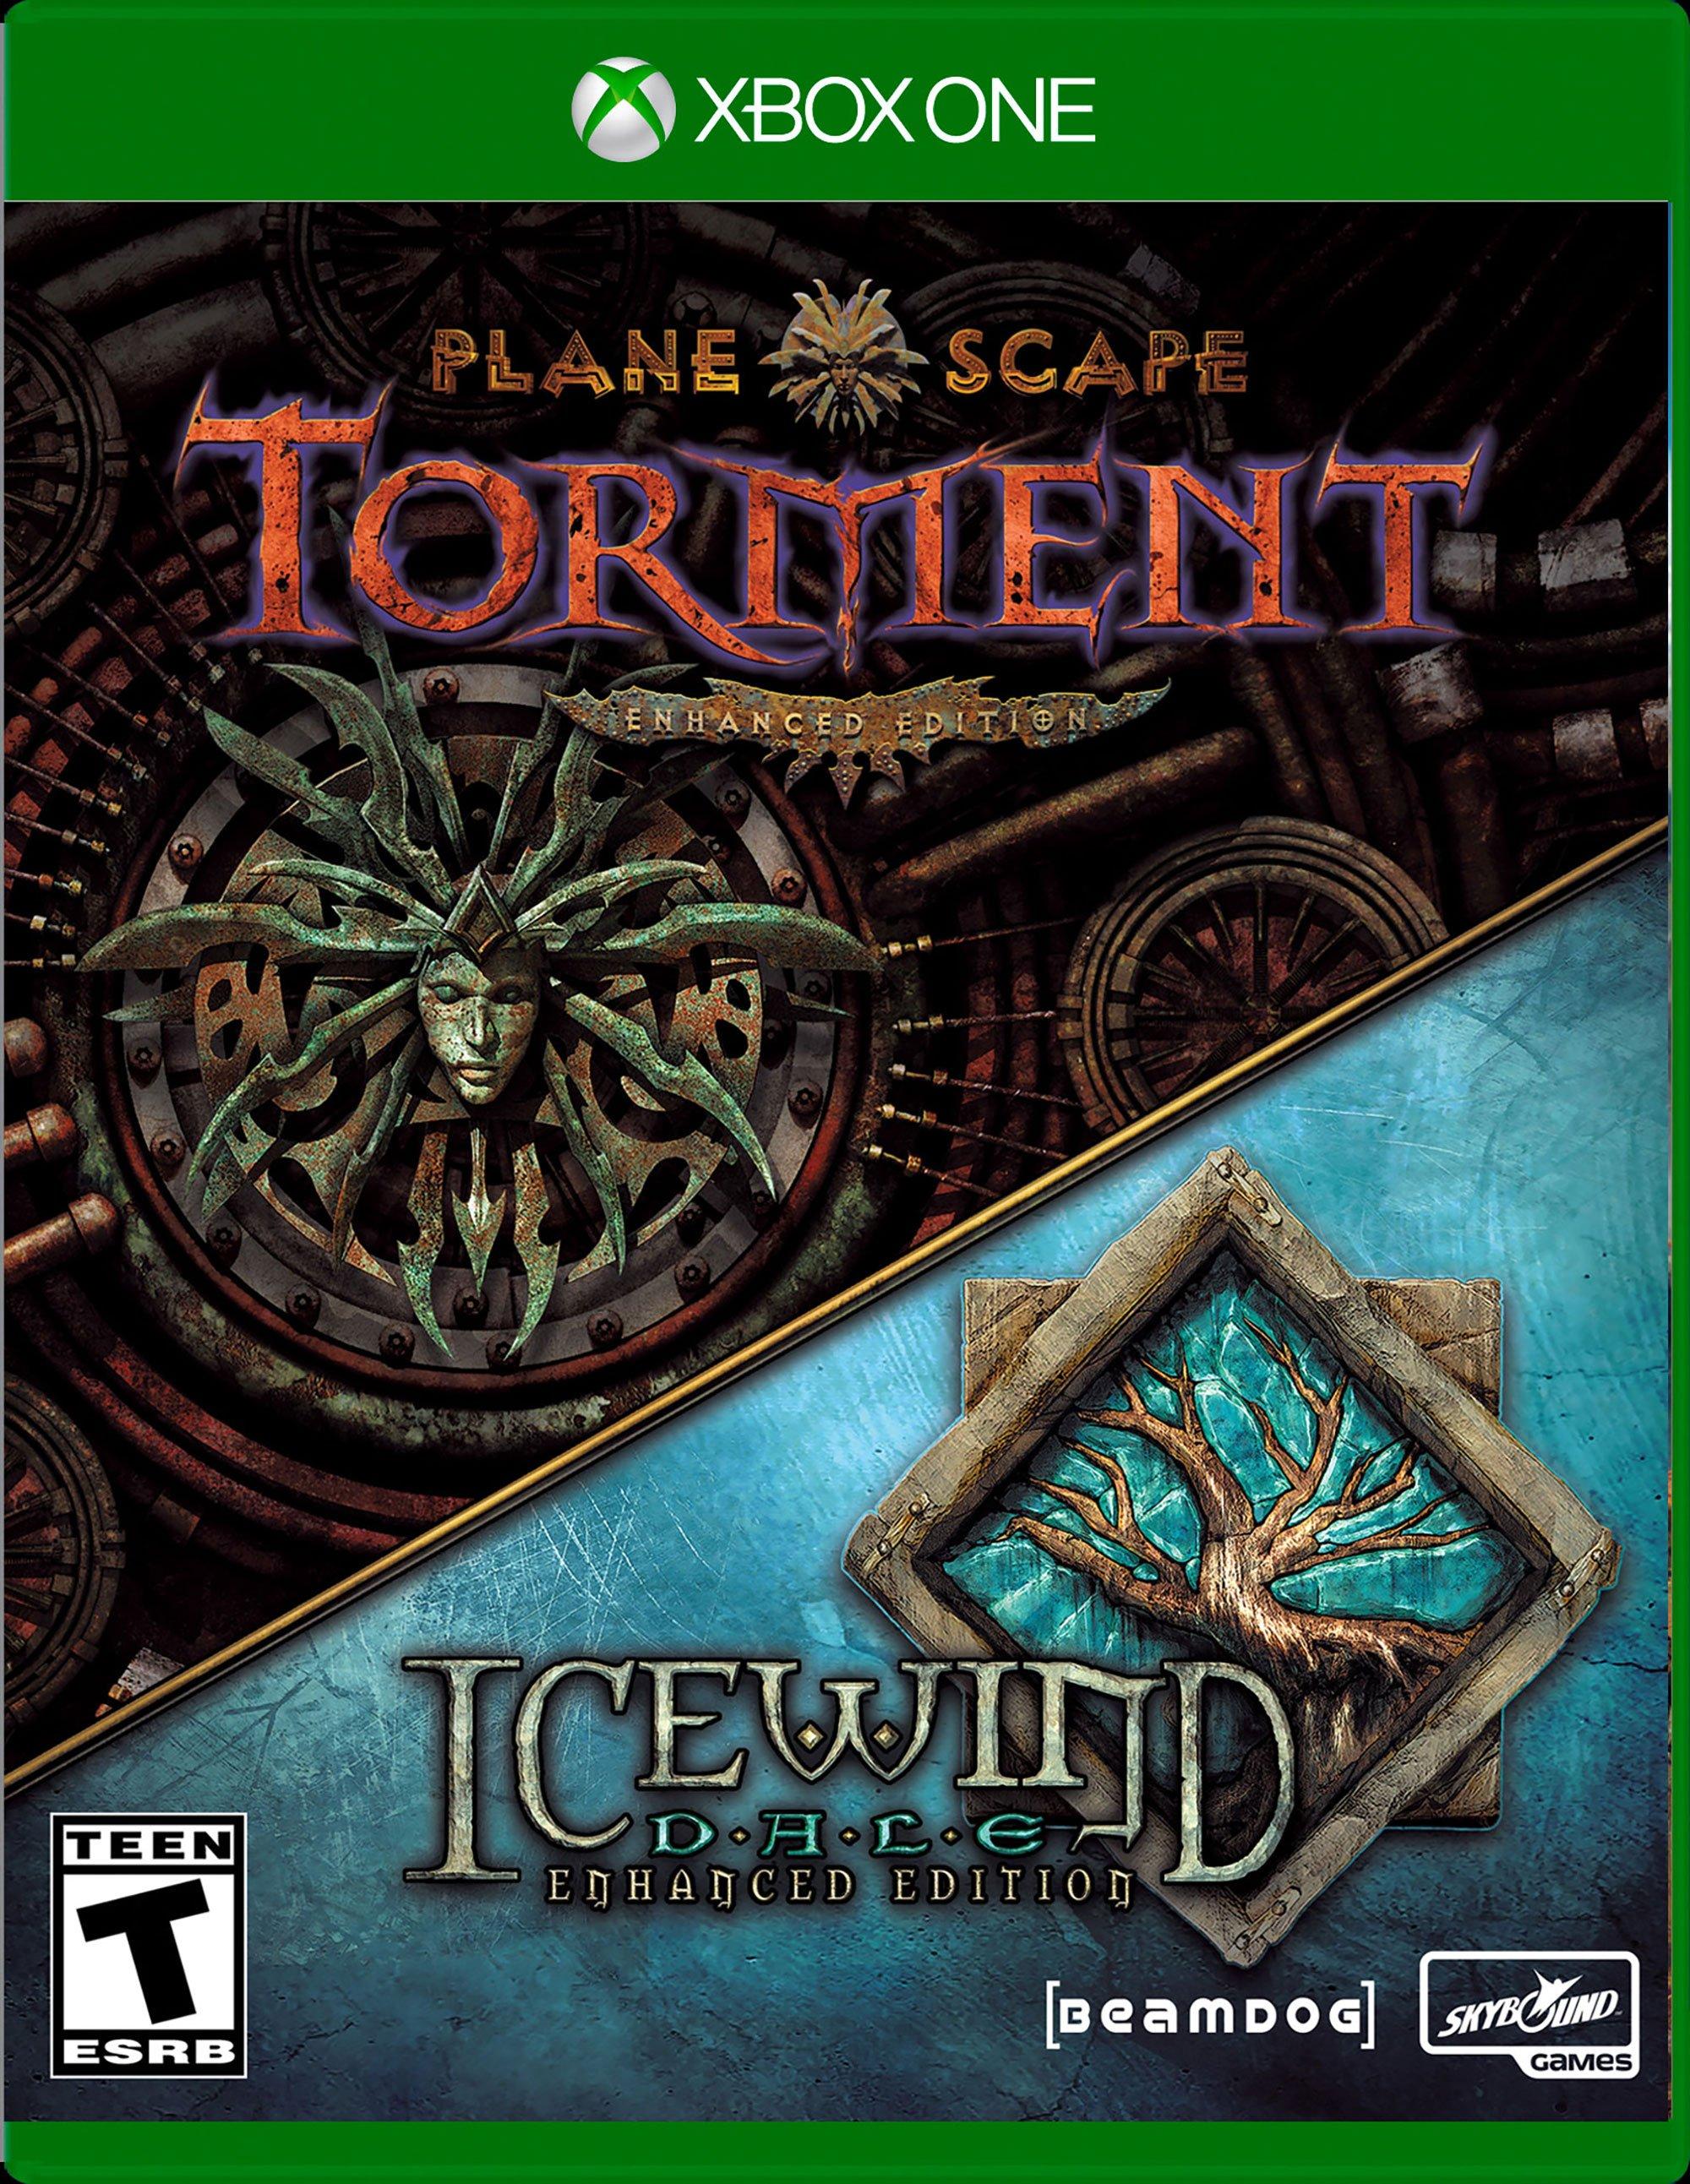 Planescape Torment and Icewind One GameStop - Xbox One | Xbox Enhanced | Edition